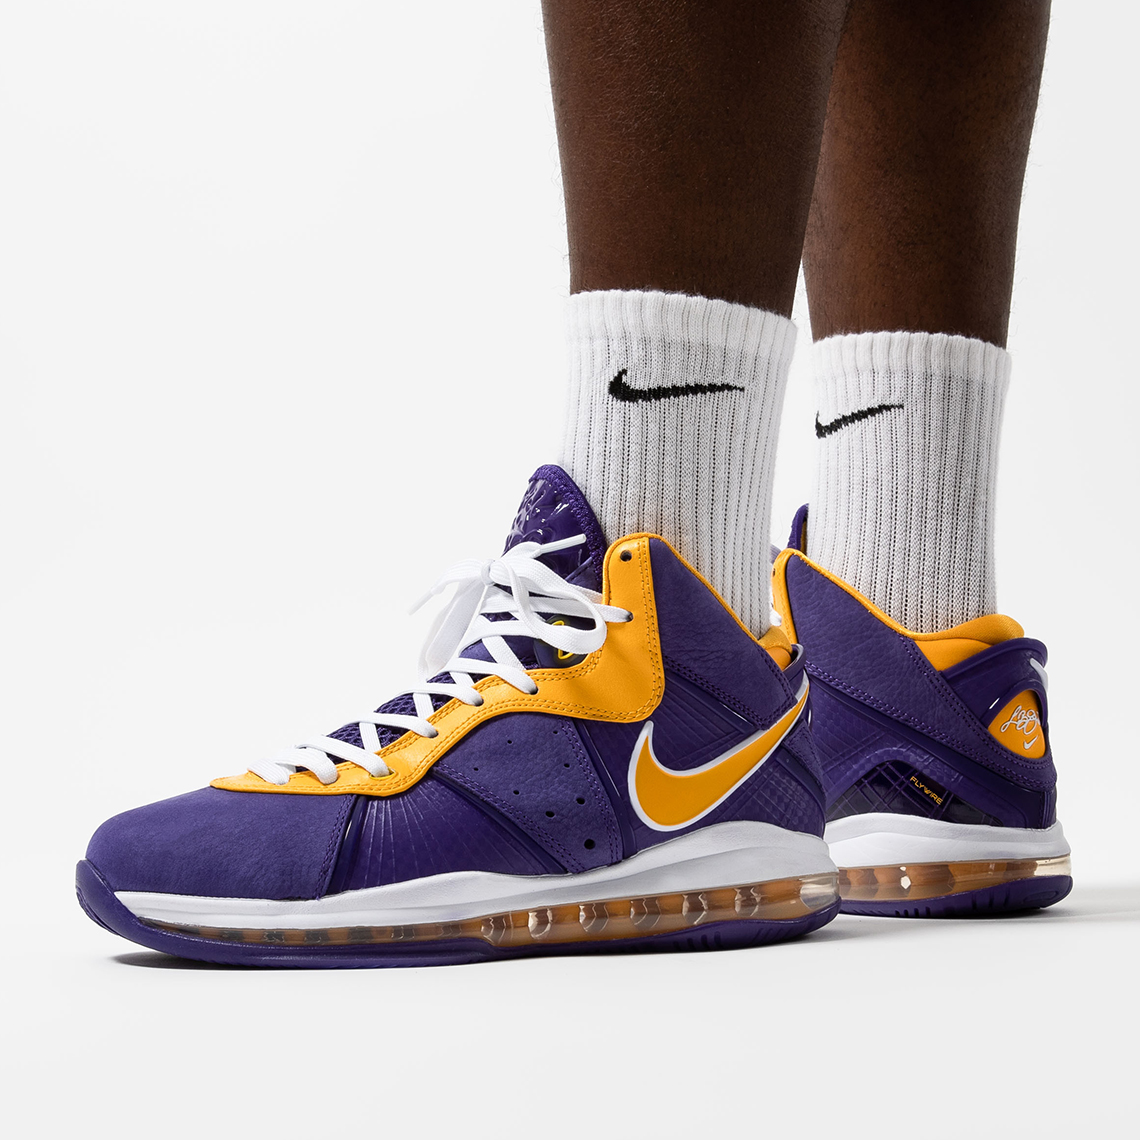 Lebron 8 Lakers Release Date 1